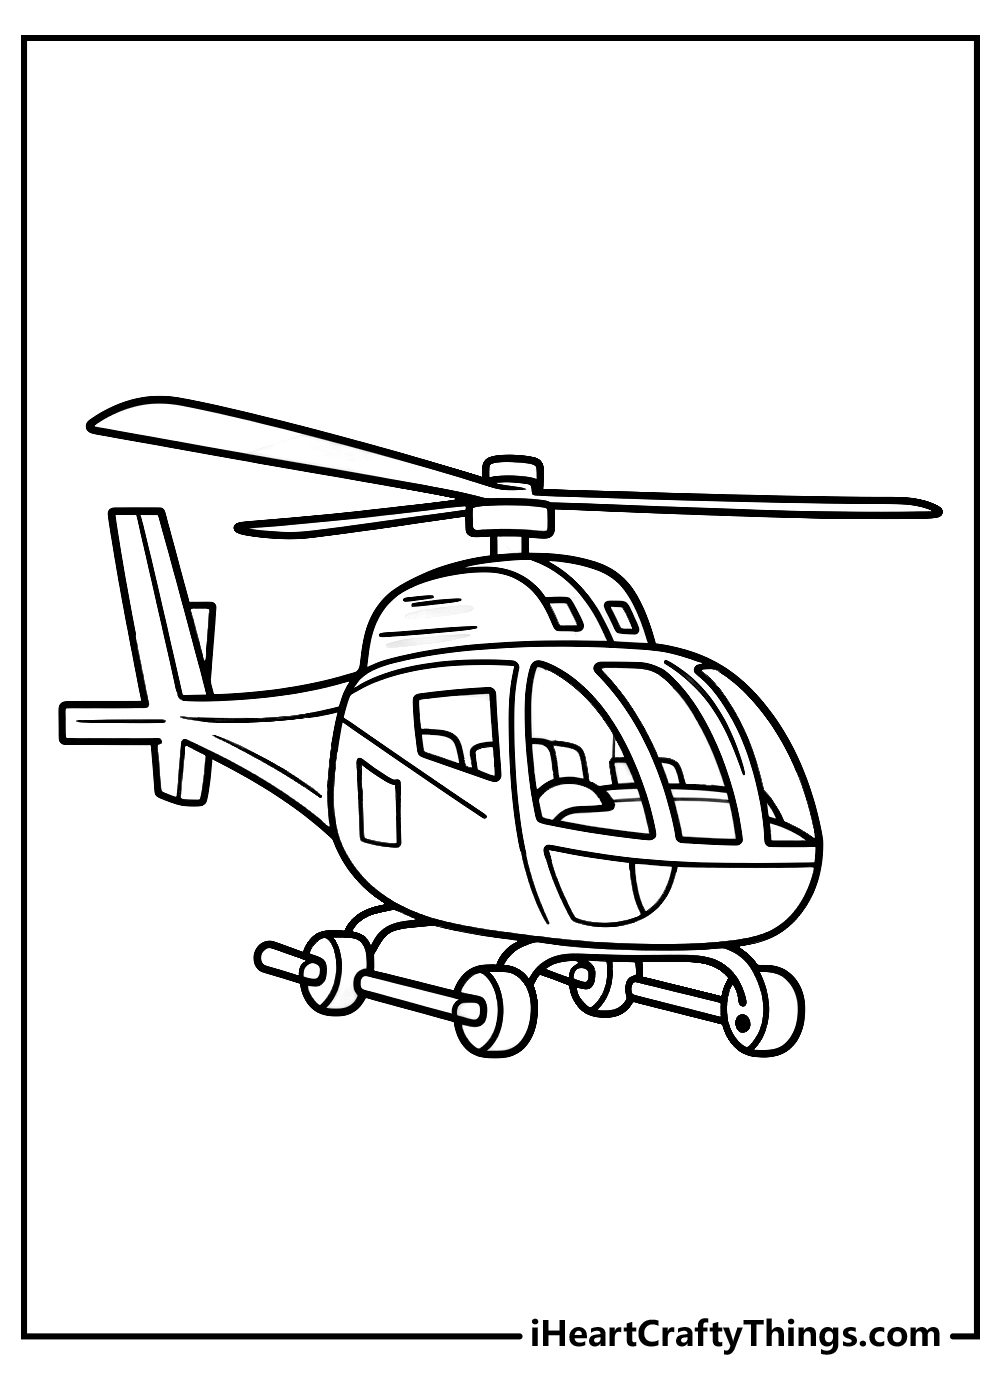 helicopter coloring printable for kids